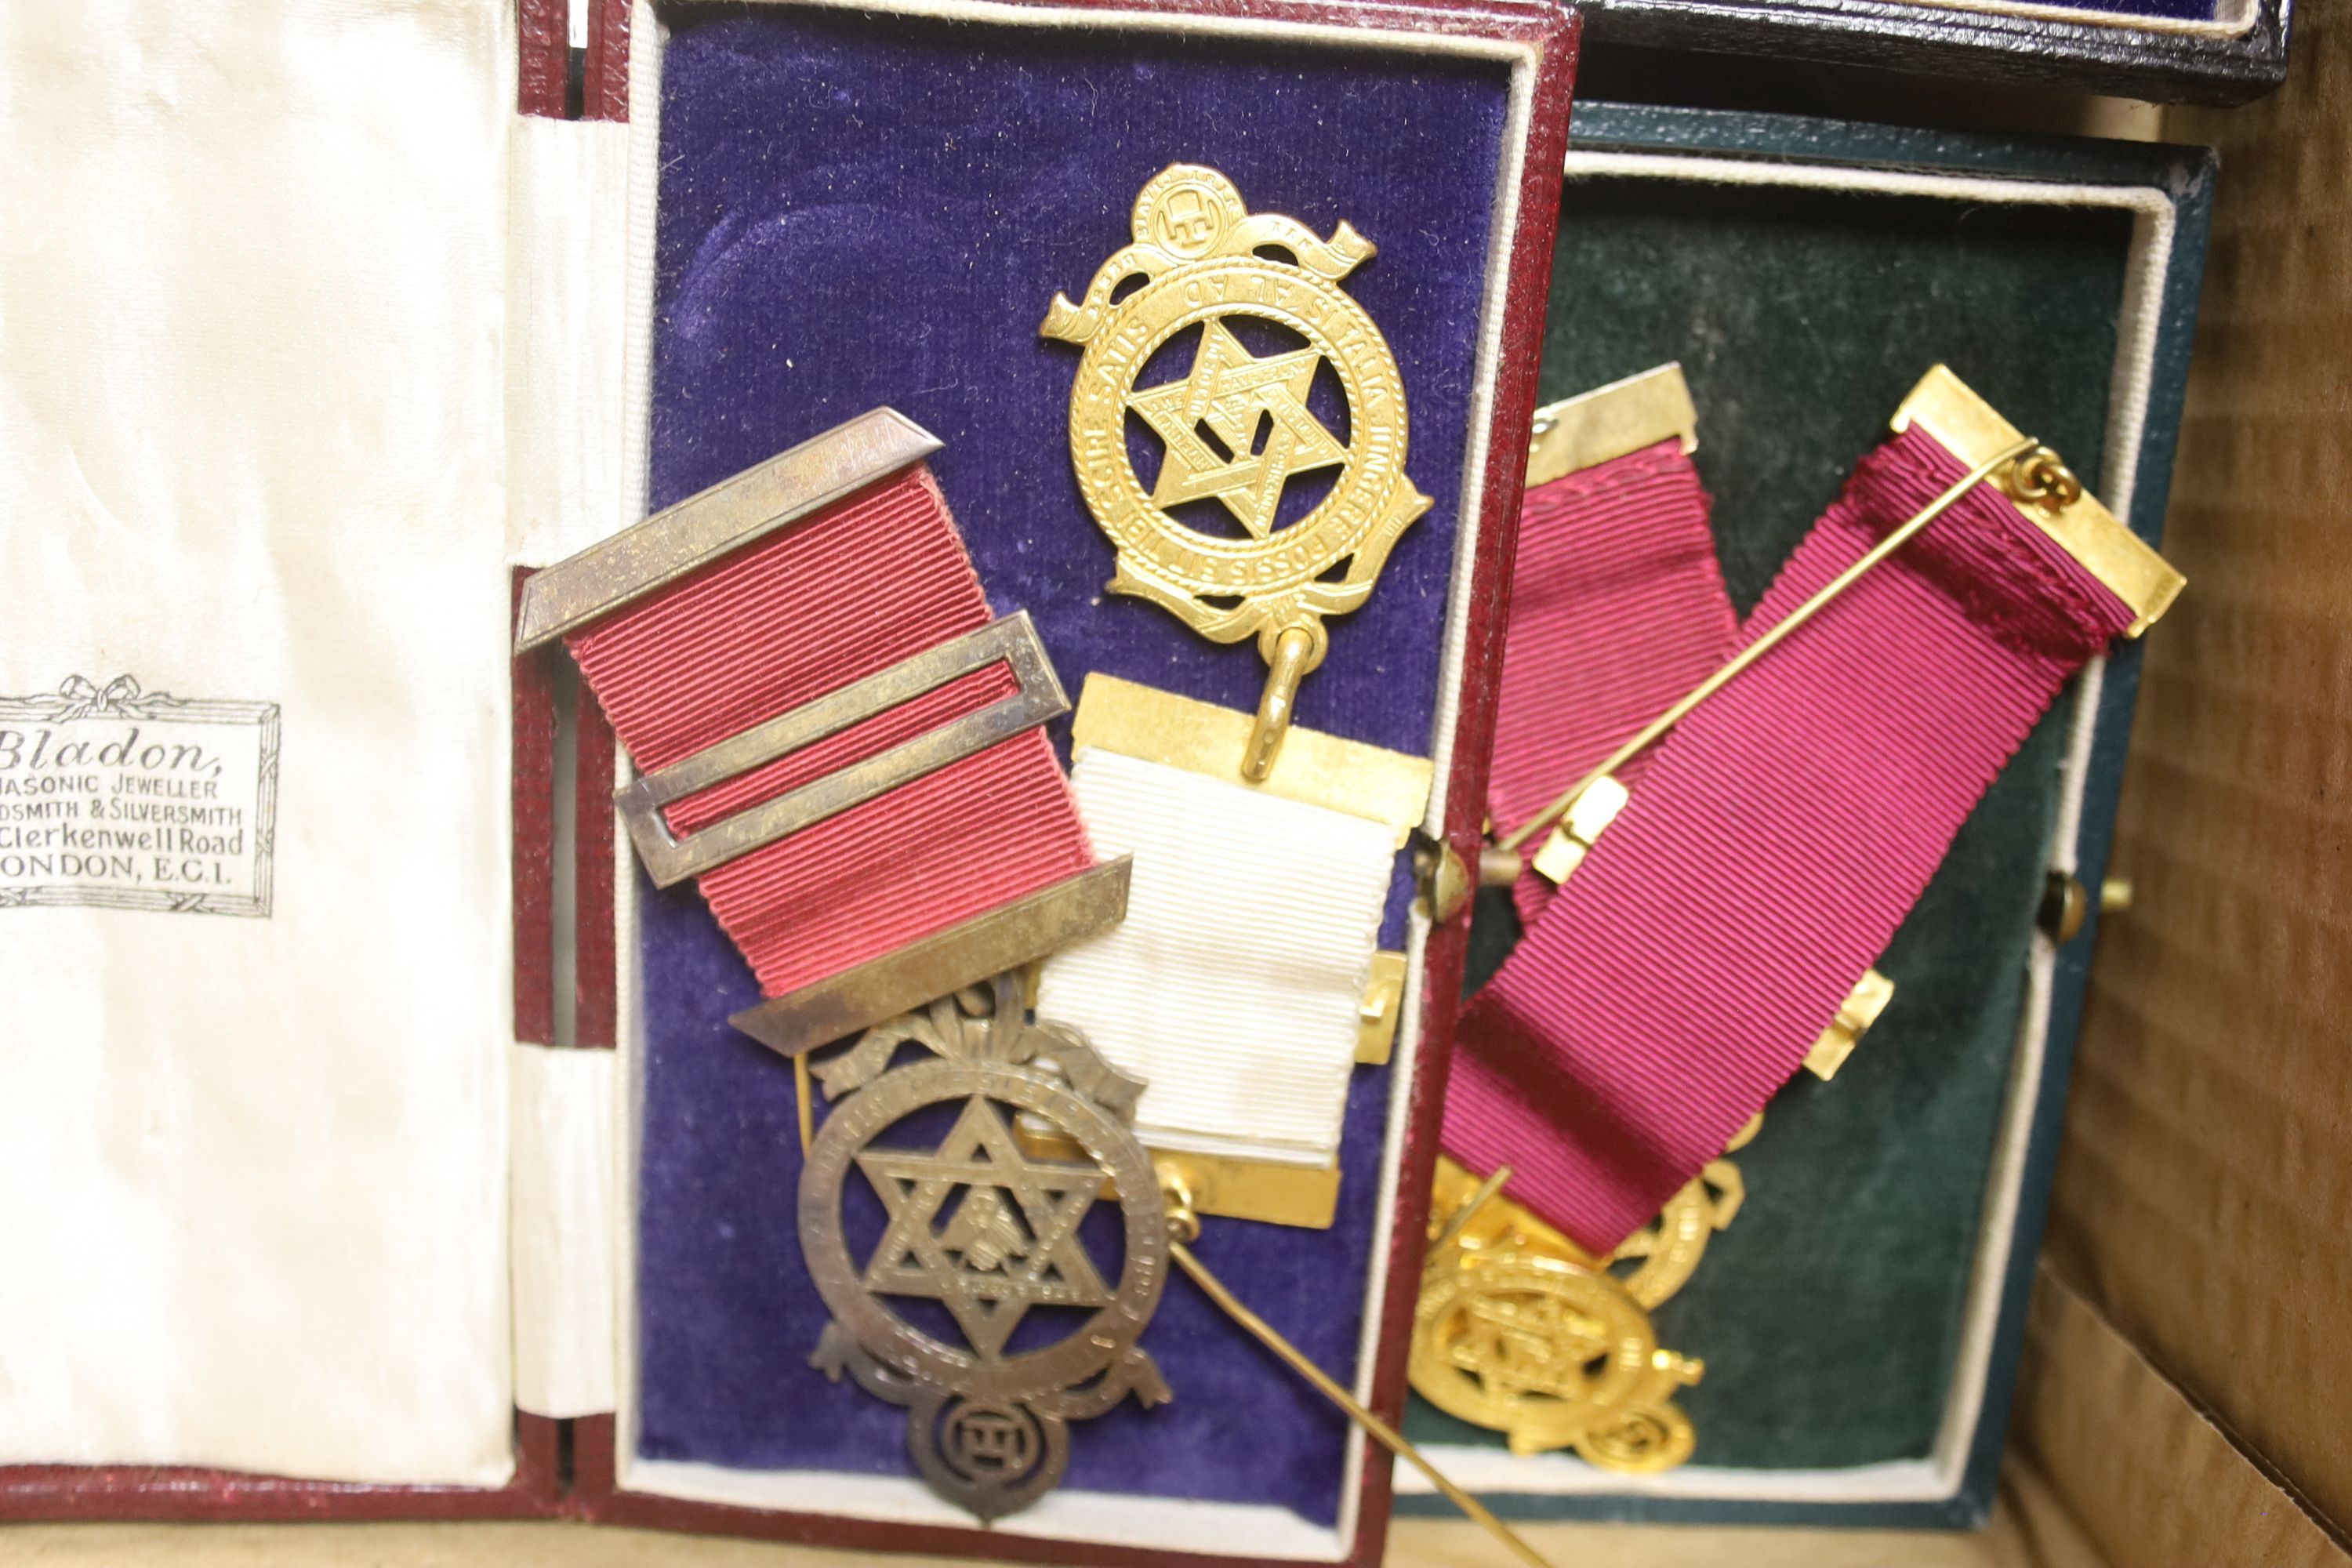 A group of Masonic sashes with metal medals and a collection of gilt metal cased medals